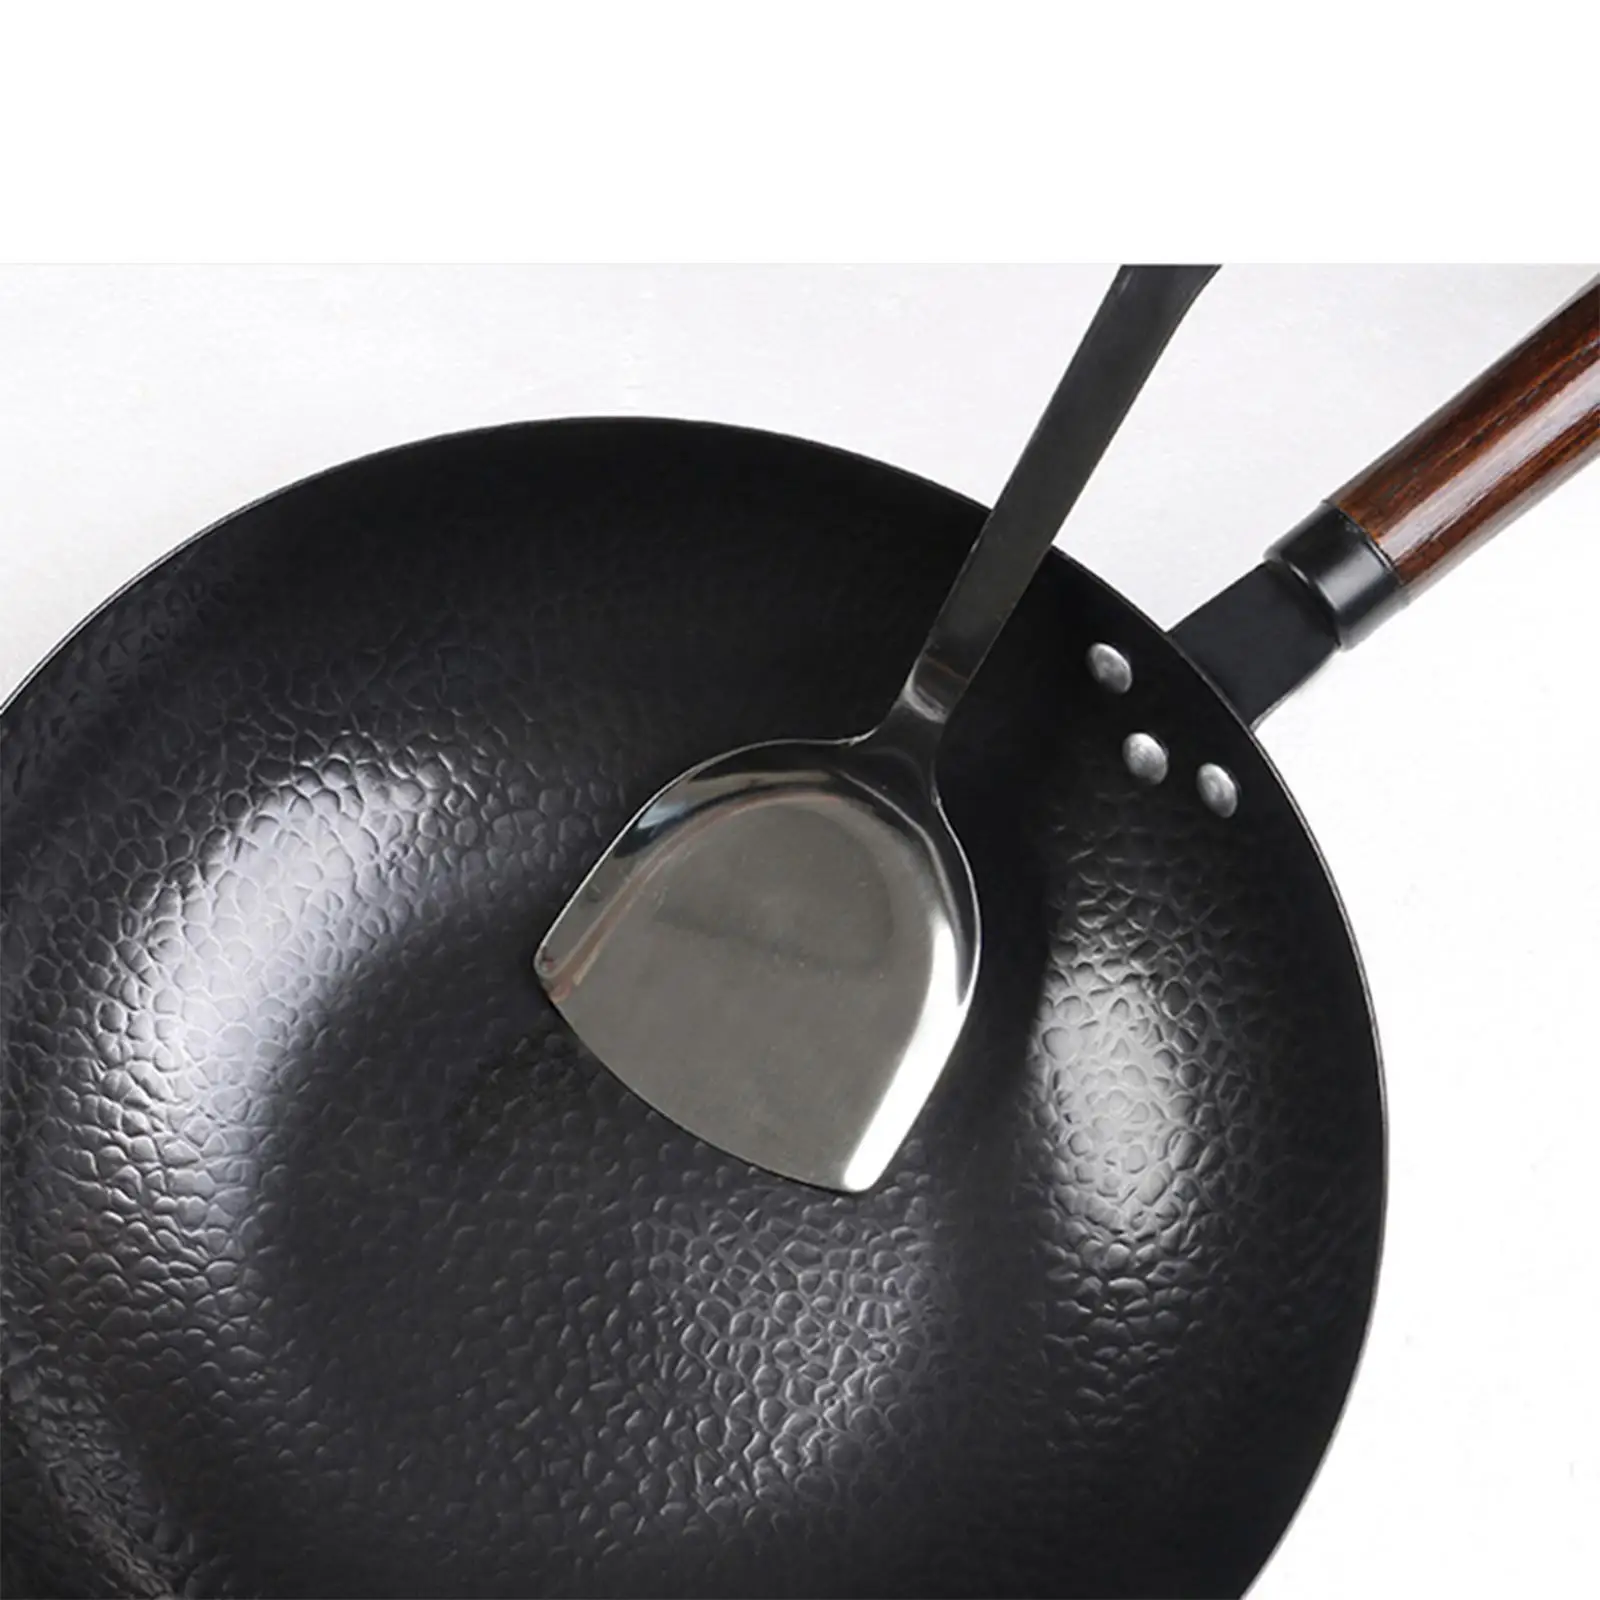 Wok Pan Long Handle Cooking Wok Nonstick Cast Iron Grilling wok Pan with Lid Stir-Fry Pan for Kitchen Cooking 32cm Meat Beef